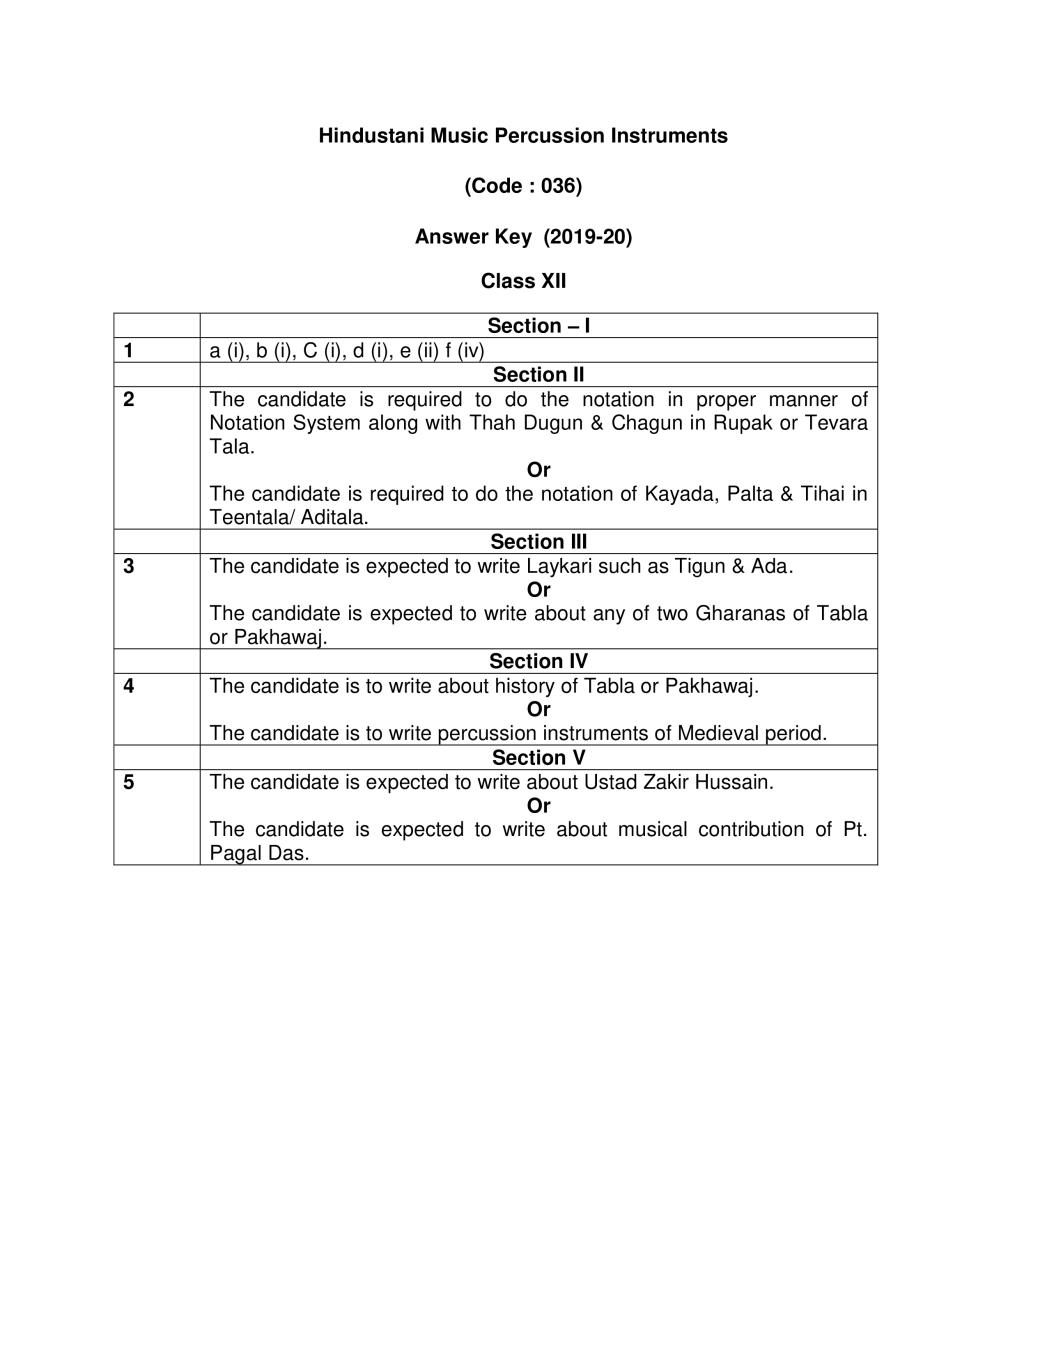 CBSE Class 12 Marking Scheme 2020 for Hindustani Music Percussion Instruments - Page 1